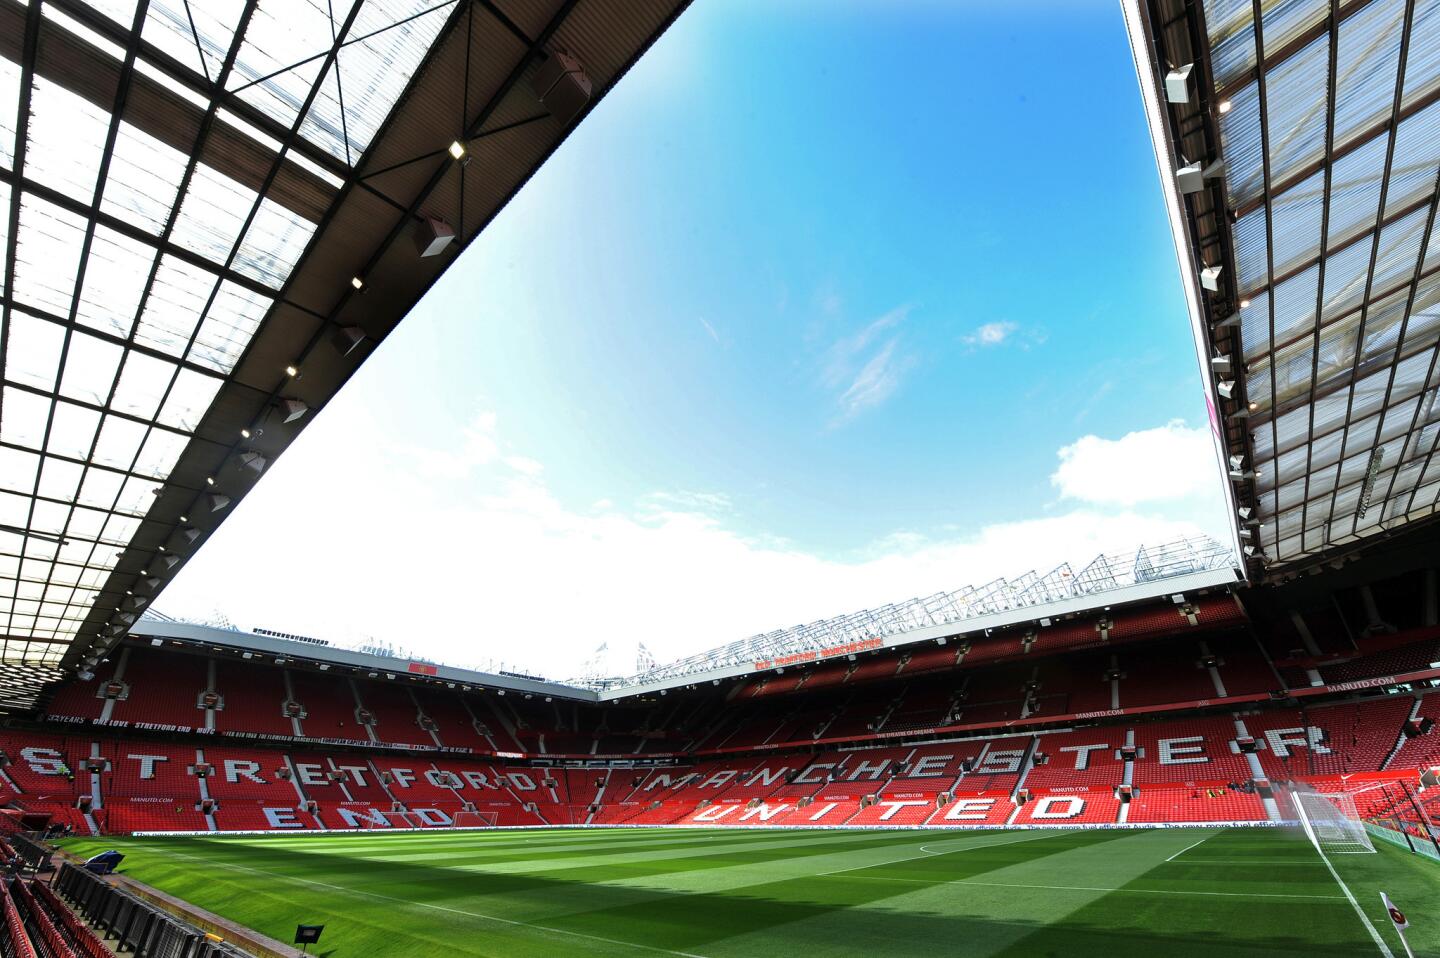 The inside of Old Trafford, the stadium of Manchester United Football Club.